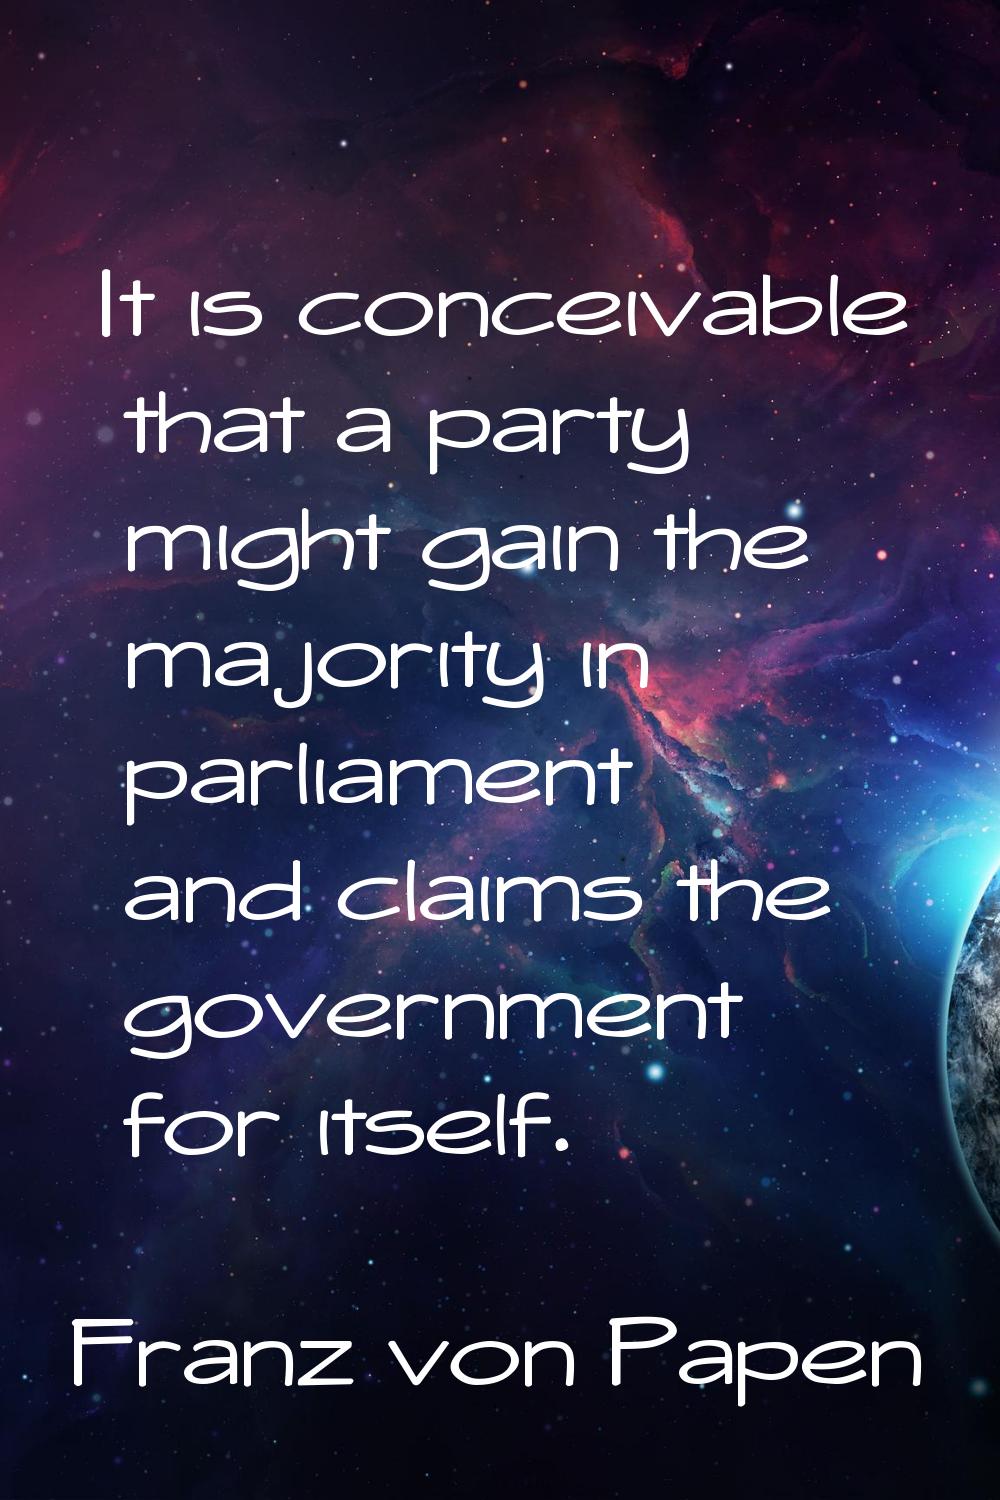 It is conceivable that a party might gain the majority in parliament and claims the government for 